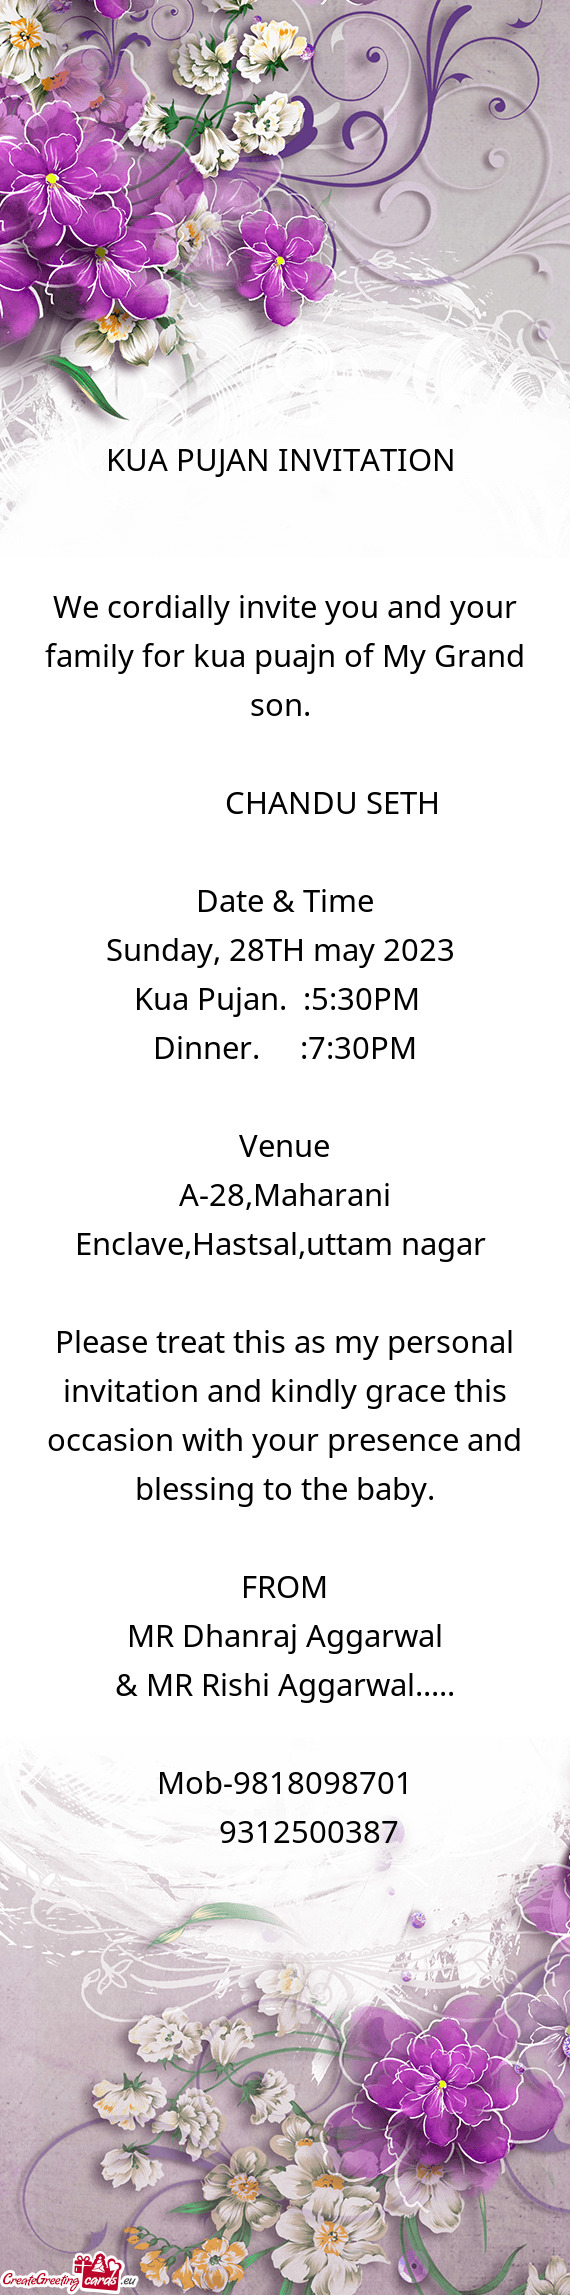 We cordially invite you and your family for kua puajn of My Grand son